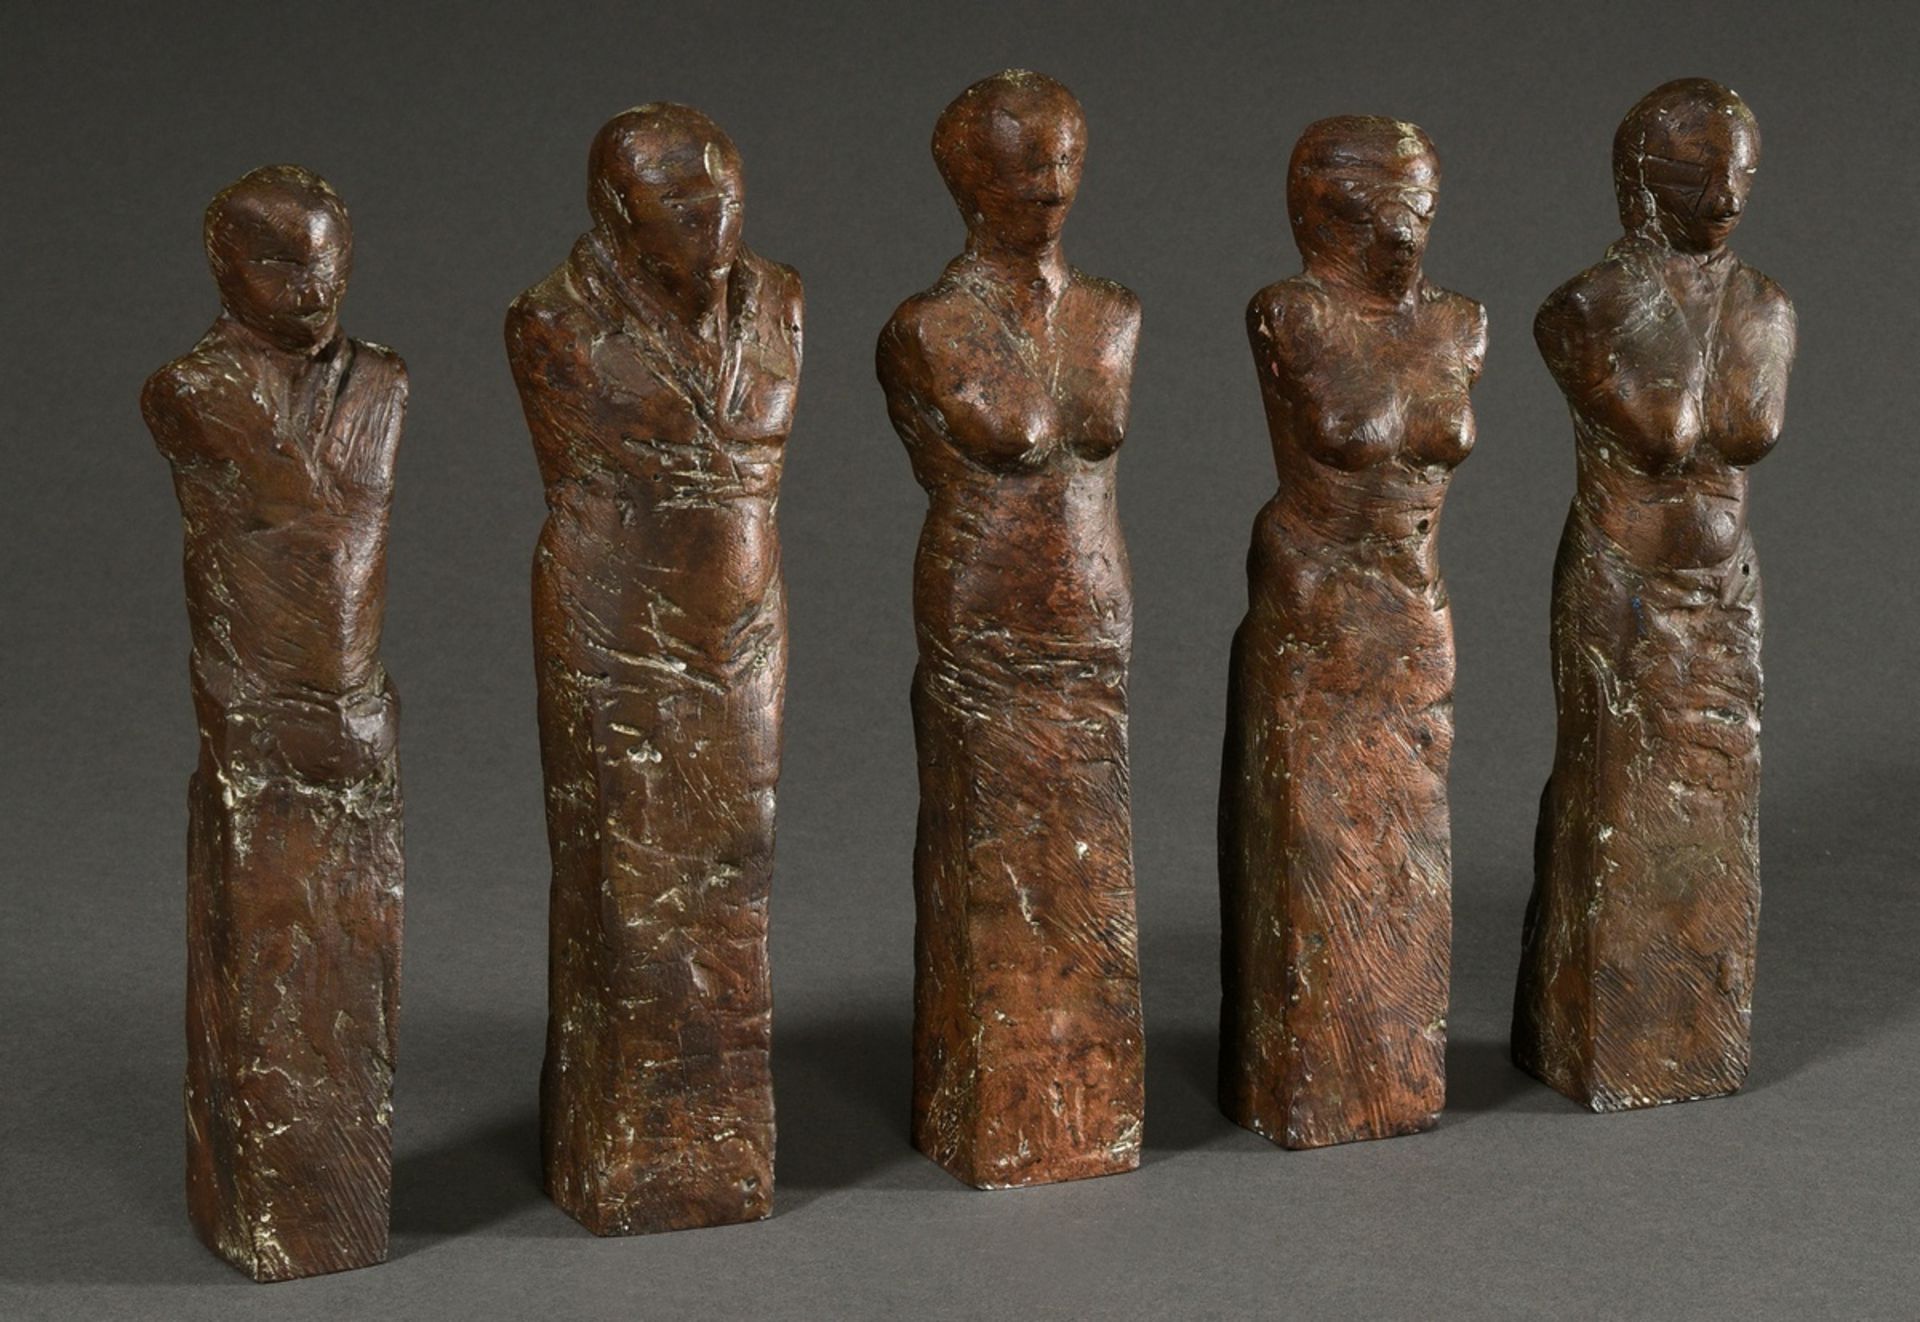 Otto, Waldemar (1929-2020) "5 Torsi", group of 5 small sculptures: 3 female and 2 male torsos, c. 1